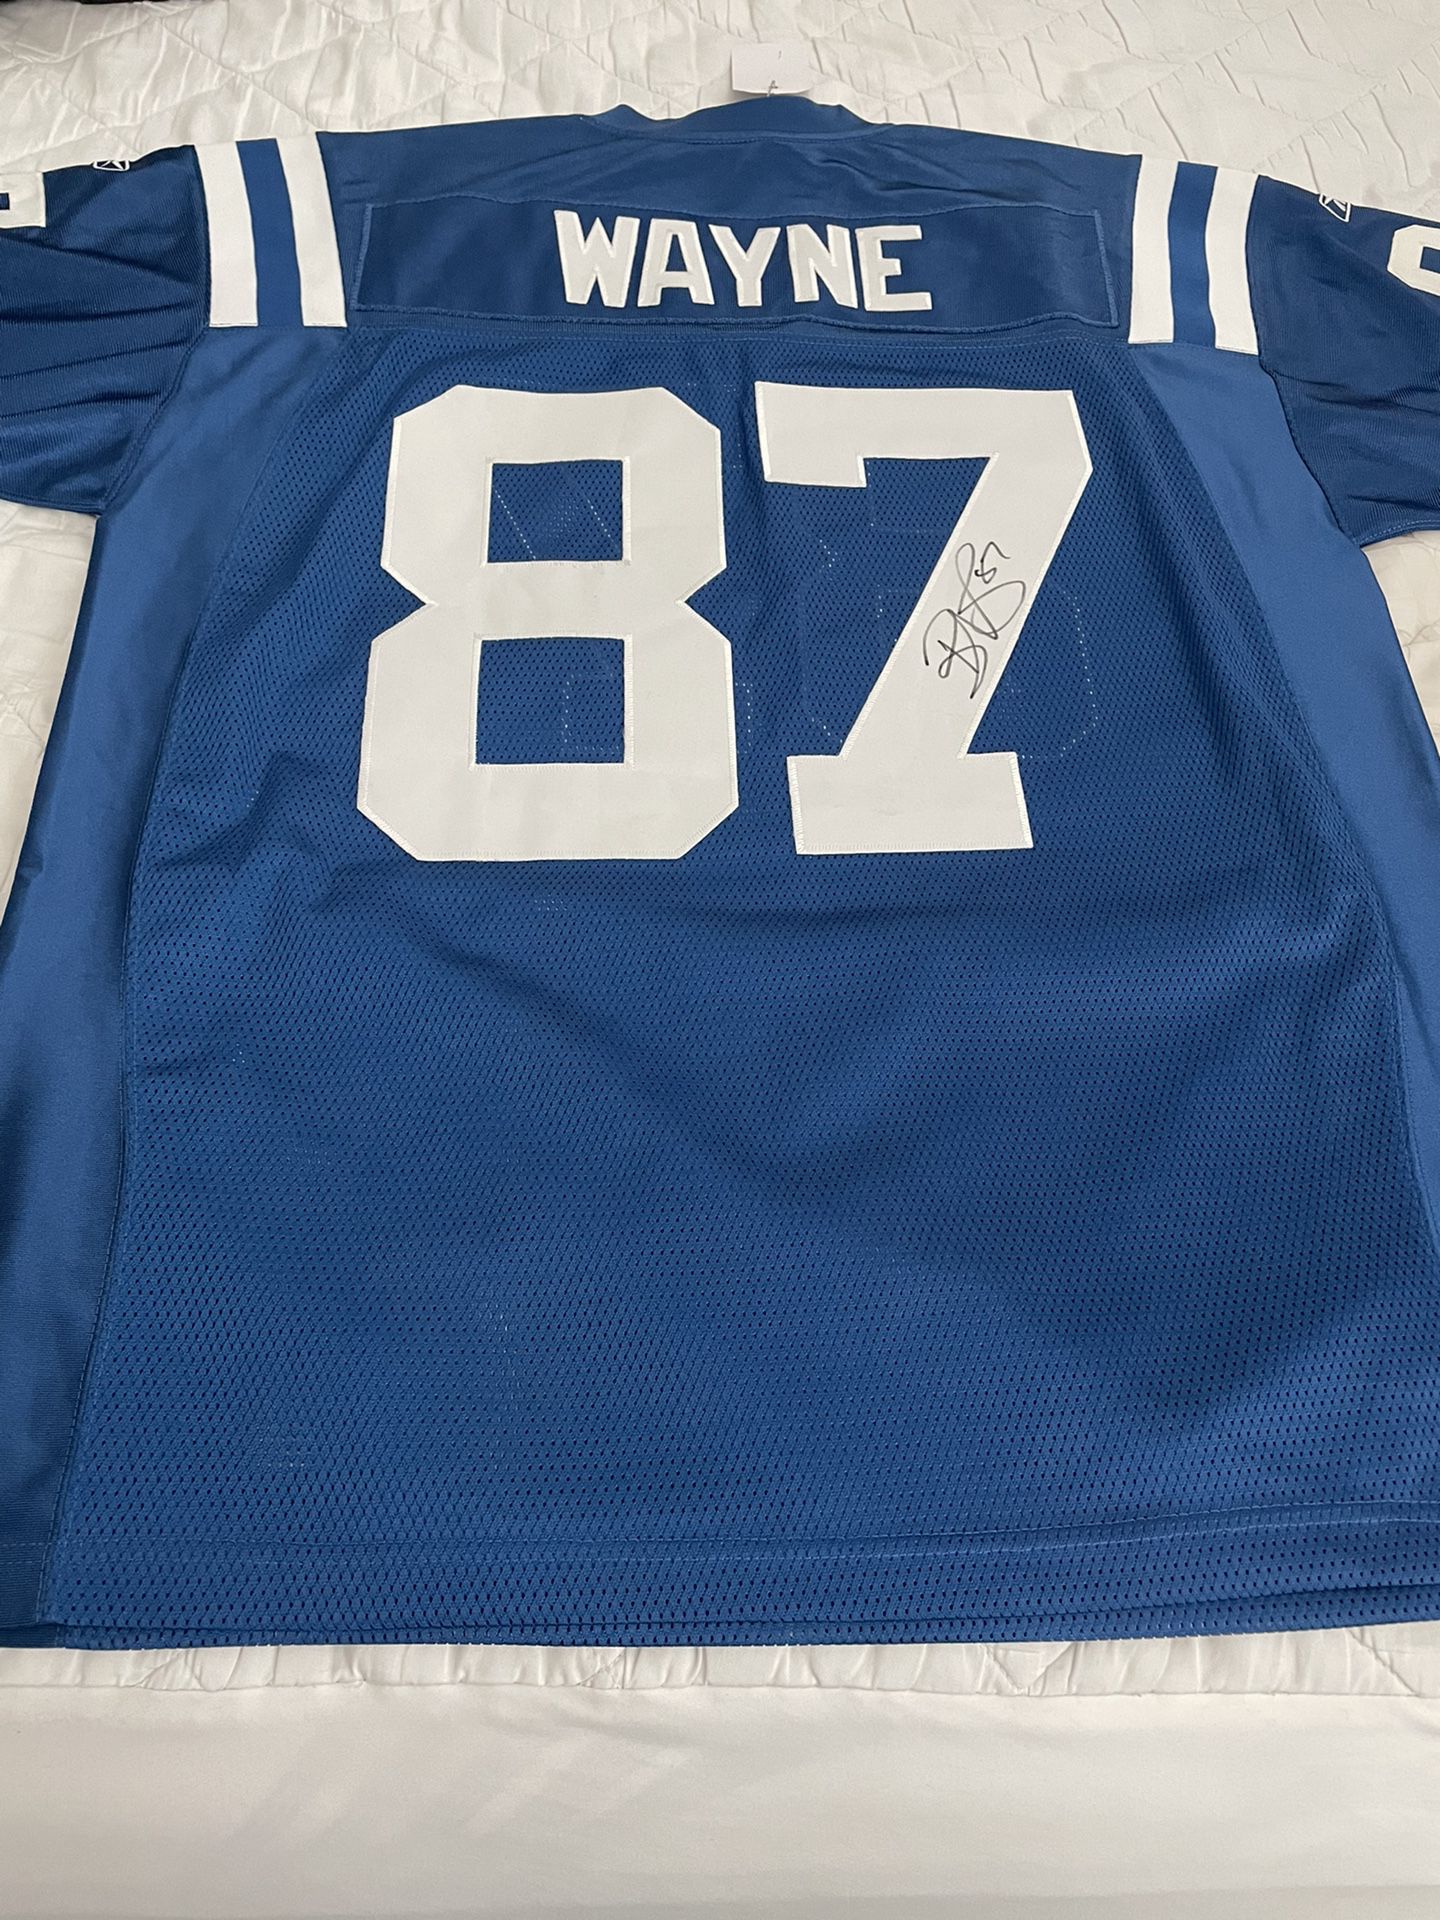 Reggie Wayne Autograph Signed Authentic Reebok NFL Jersey Indianapolis  Colts for Sale in Palmdale, CA - OfferUp